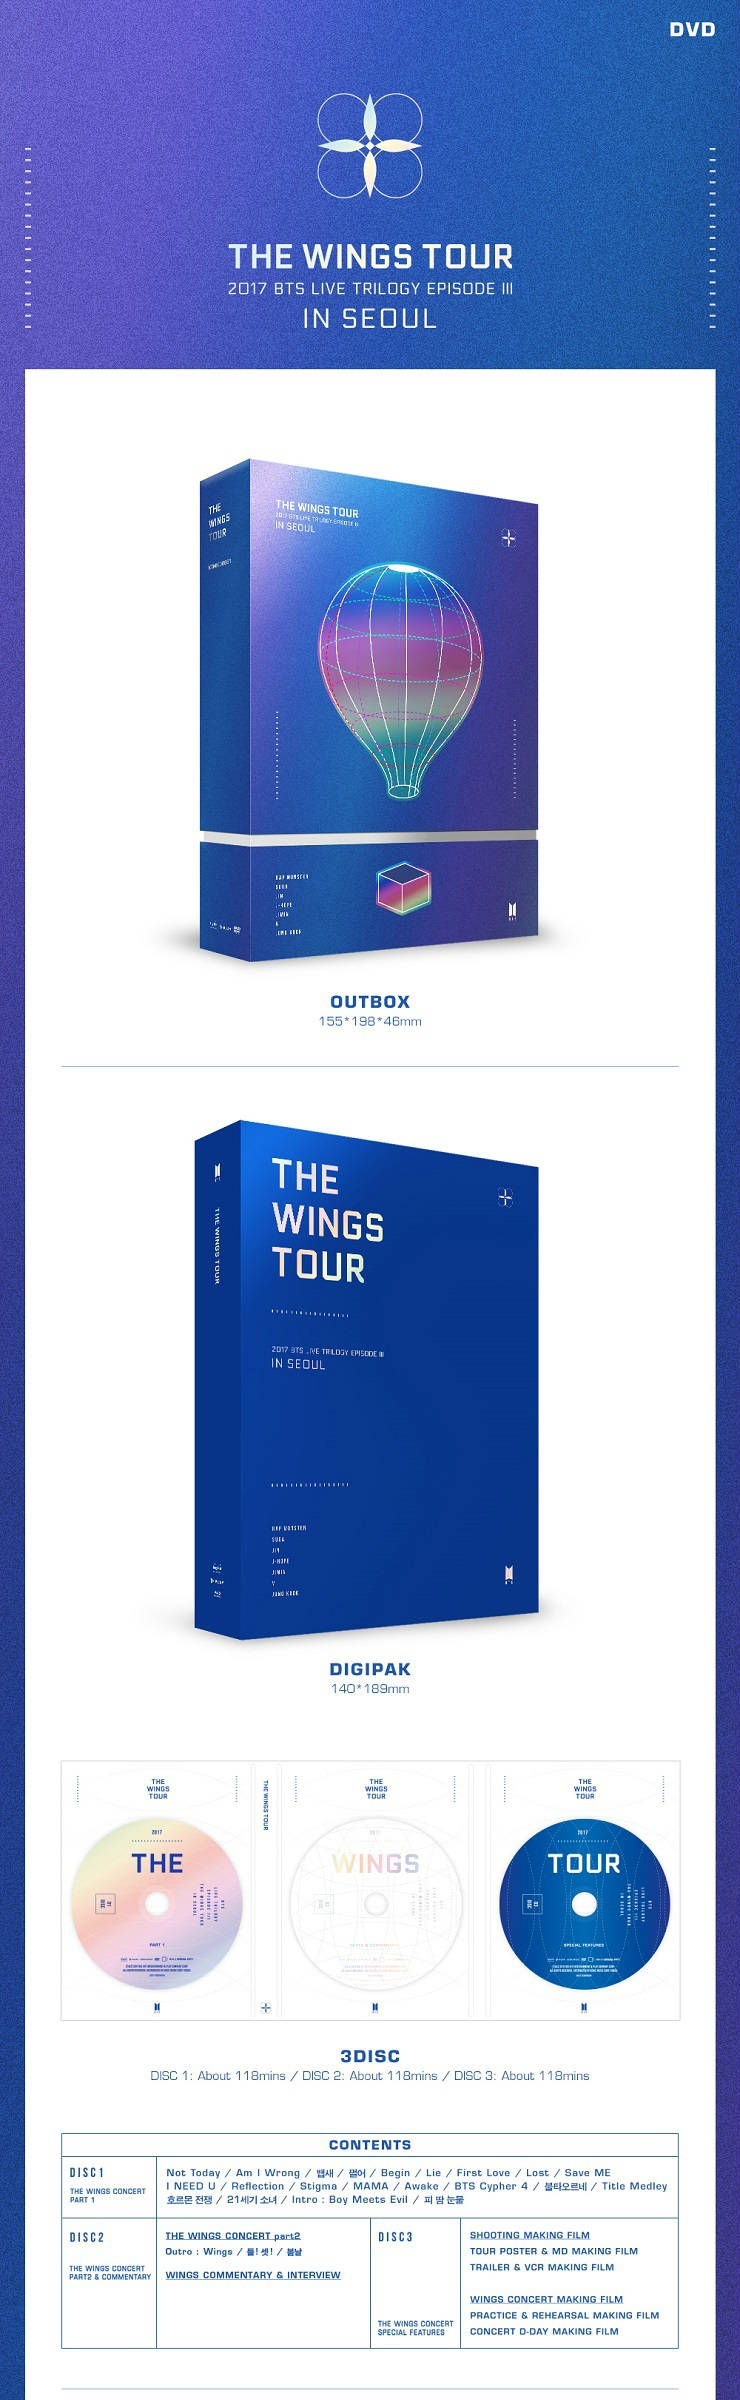 COKKYBTS THE WINGS TOUR DVD